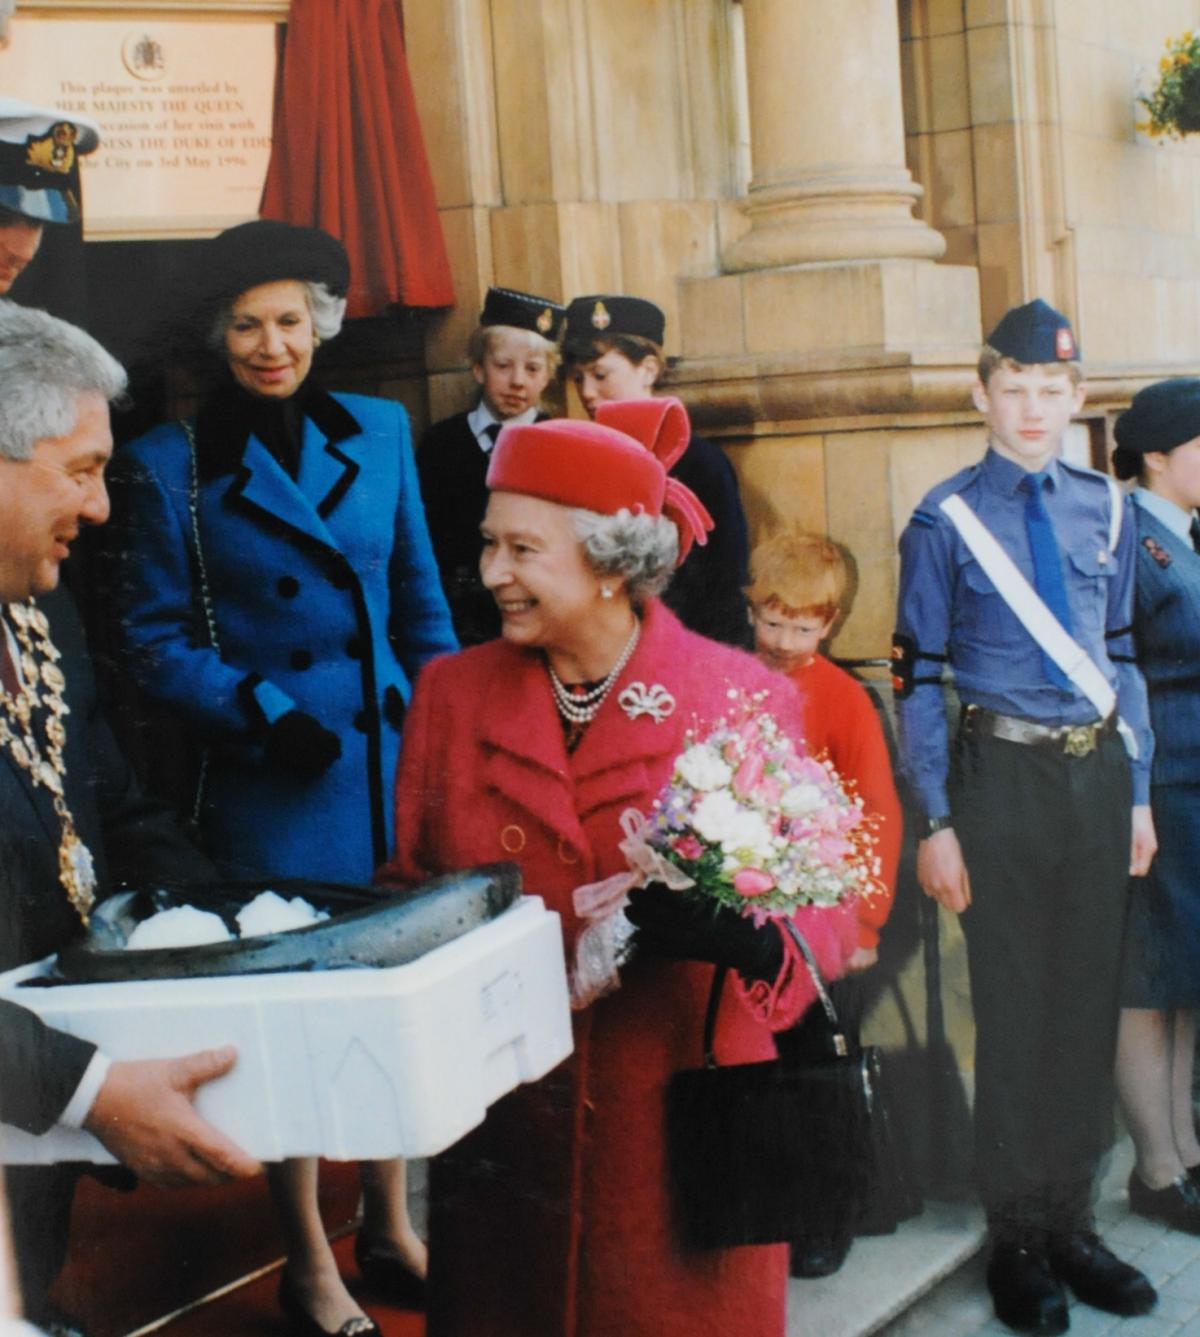 Mayor George Hyde presents the Queen with a salmon taken from the Wye just before her visit, in 1996